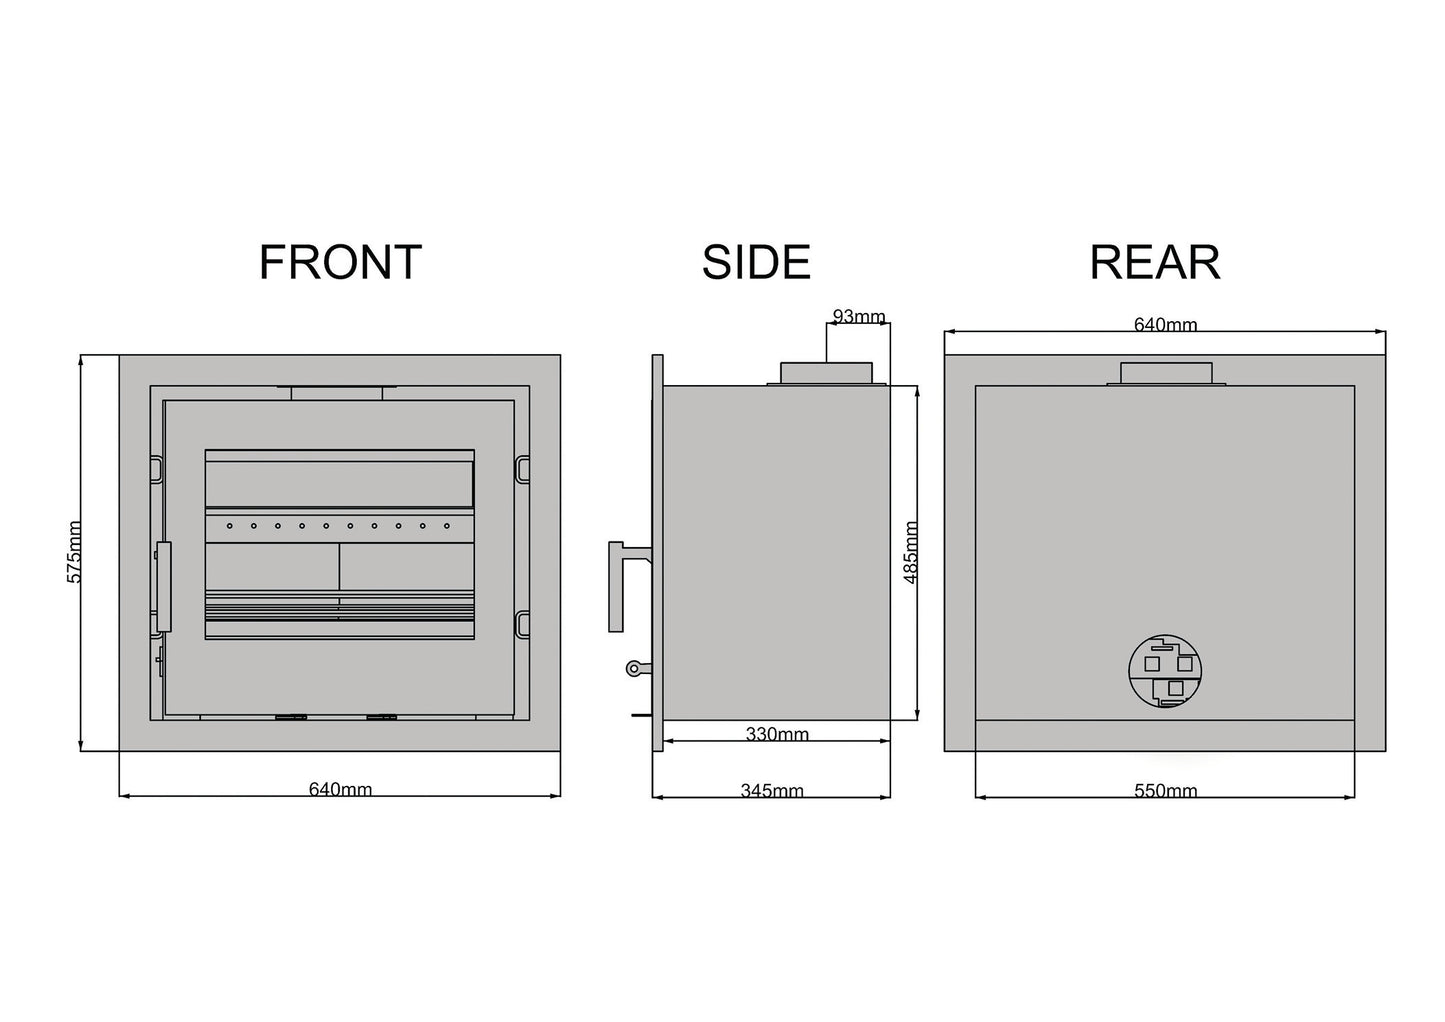 Dimensions and specifications for the Saltfire C7 multifuel inset stove